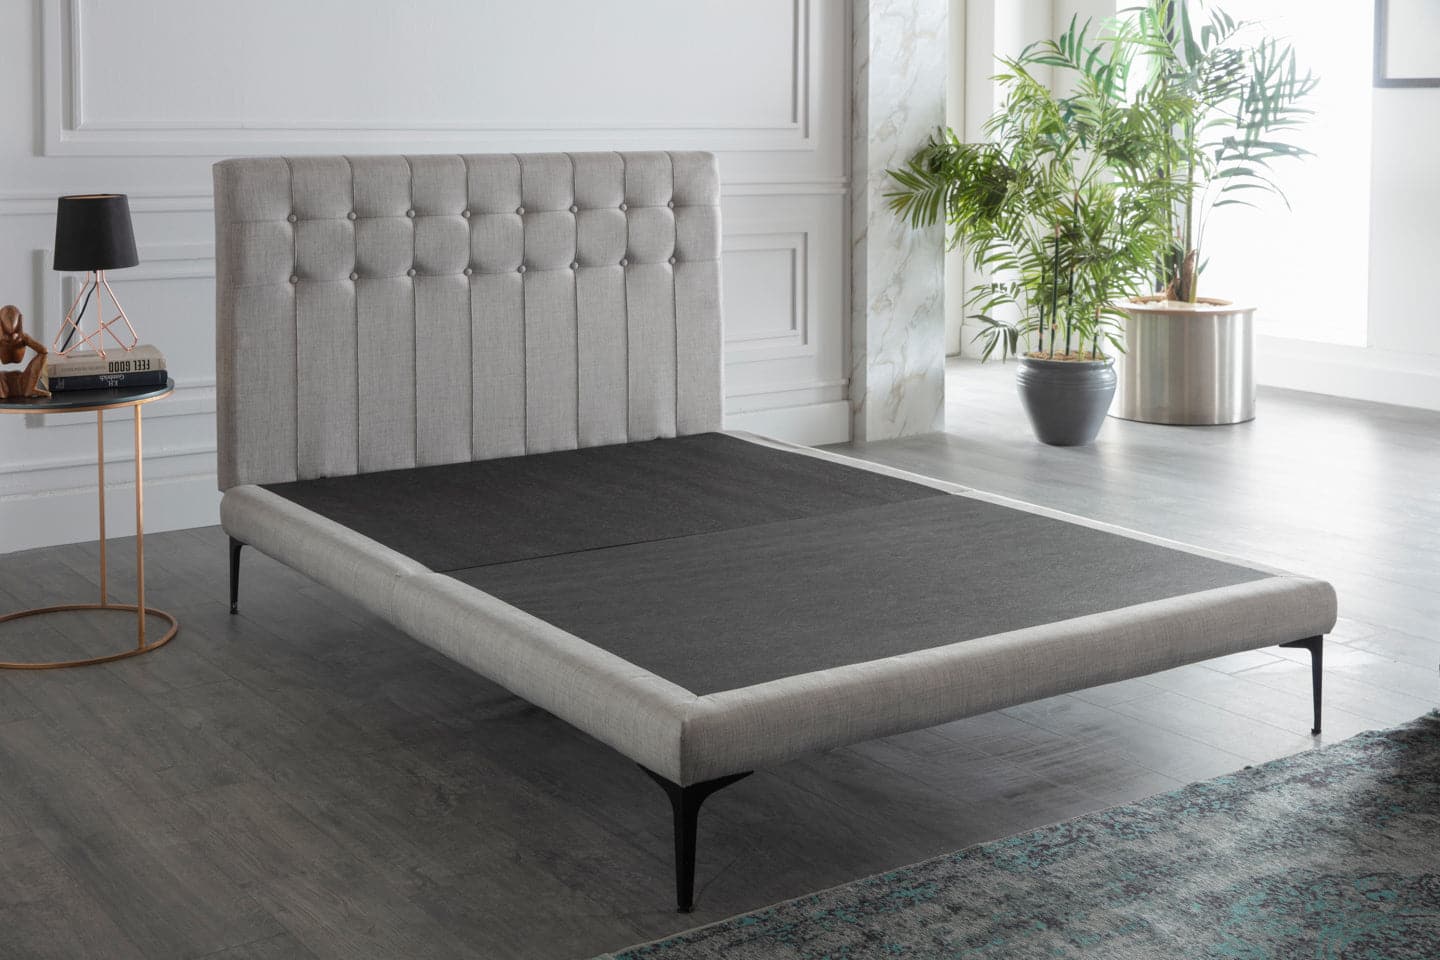 Stratton Bed In A Box by Bellona Twin BELL BASIC LIGHT GREY